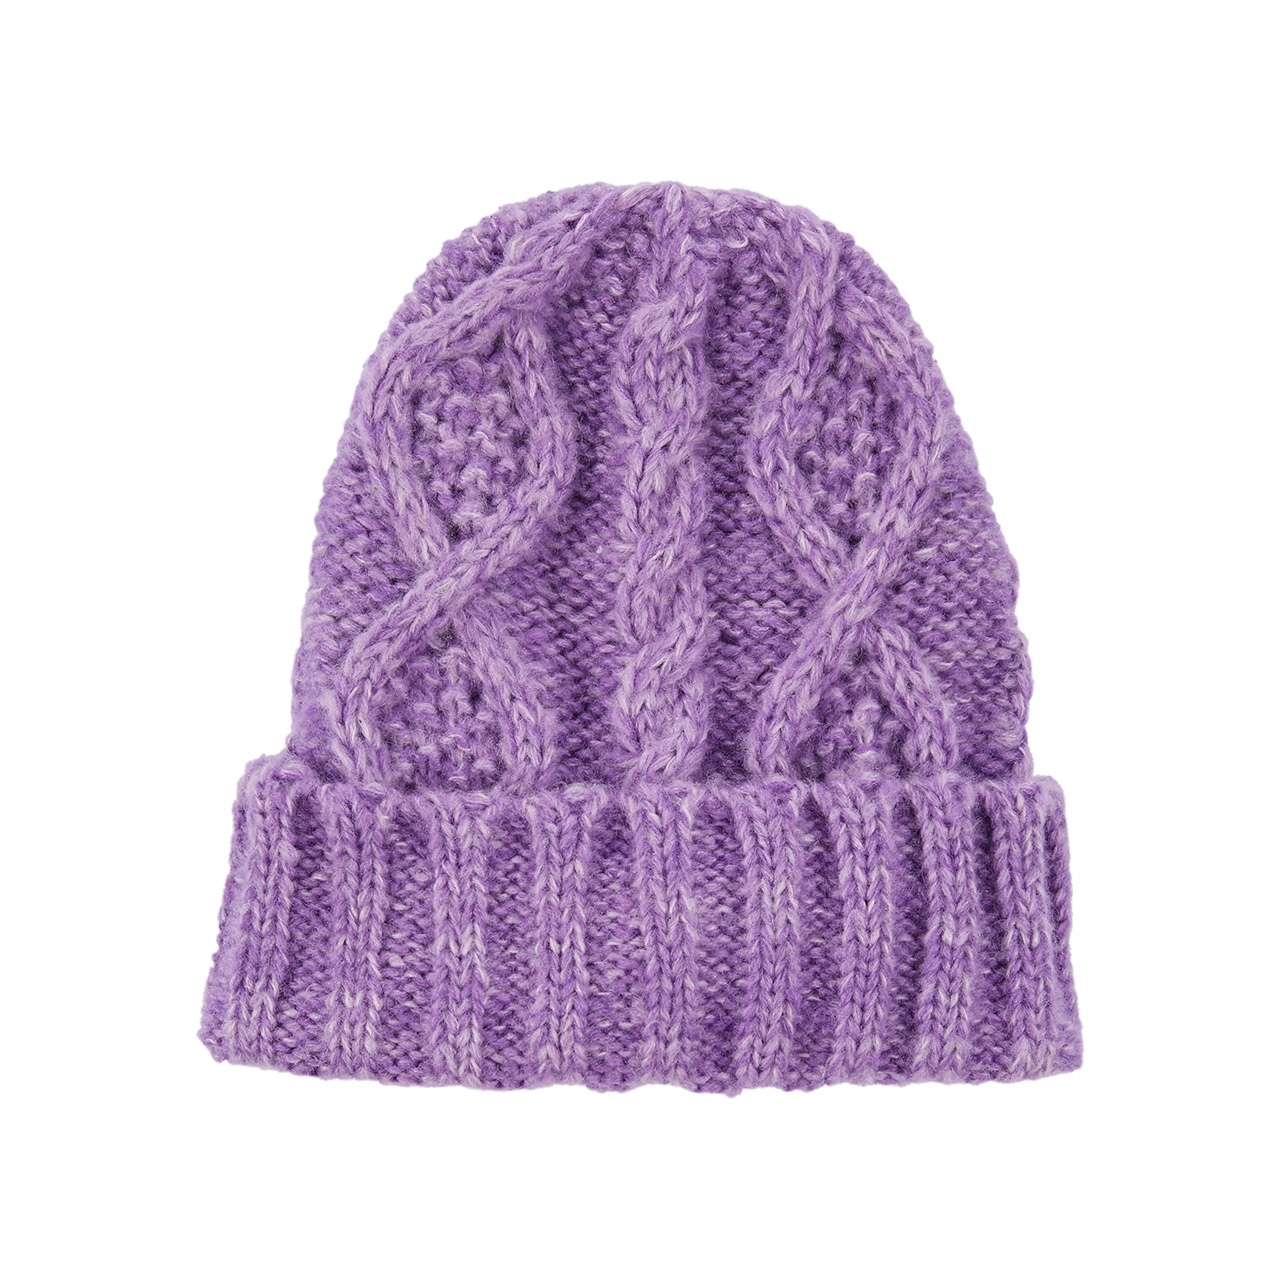 A purple knitted beannie for babies.